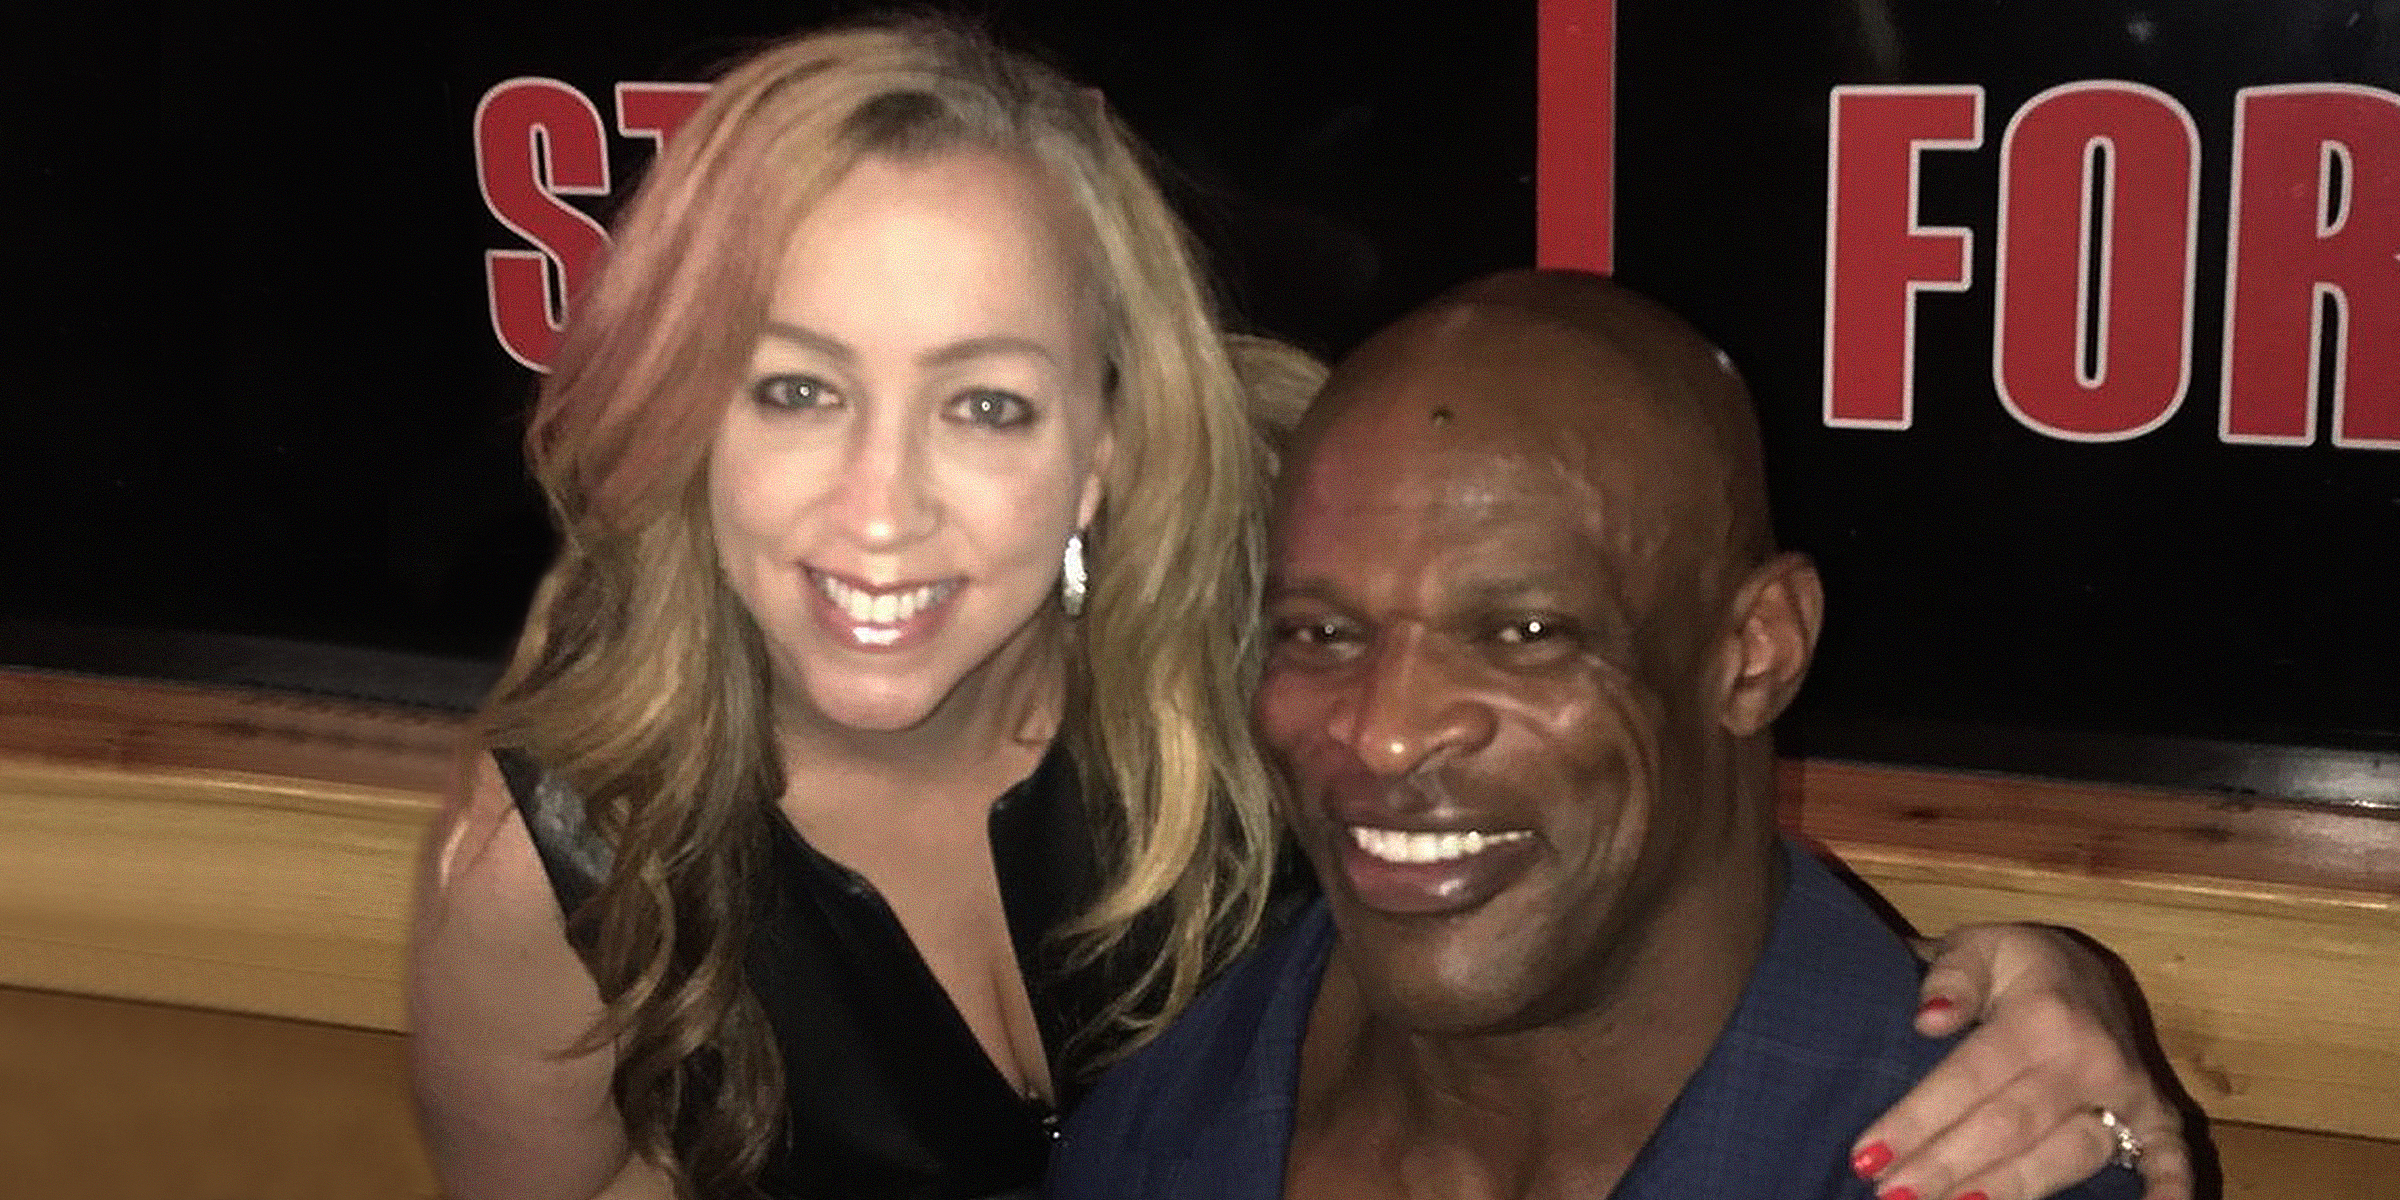 Susan Williamson and Ronnie Coleman | Source: Instagram/ronniecoleman8